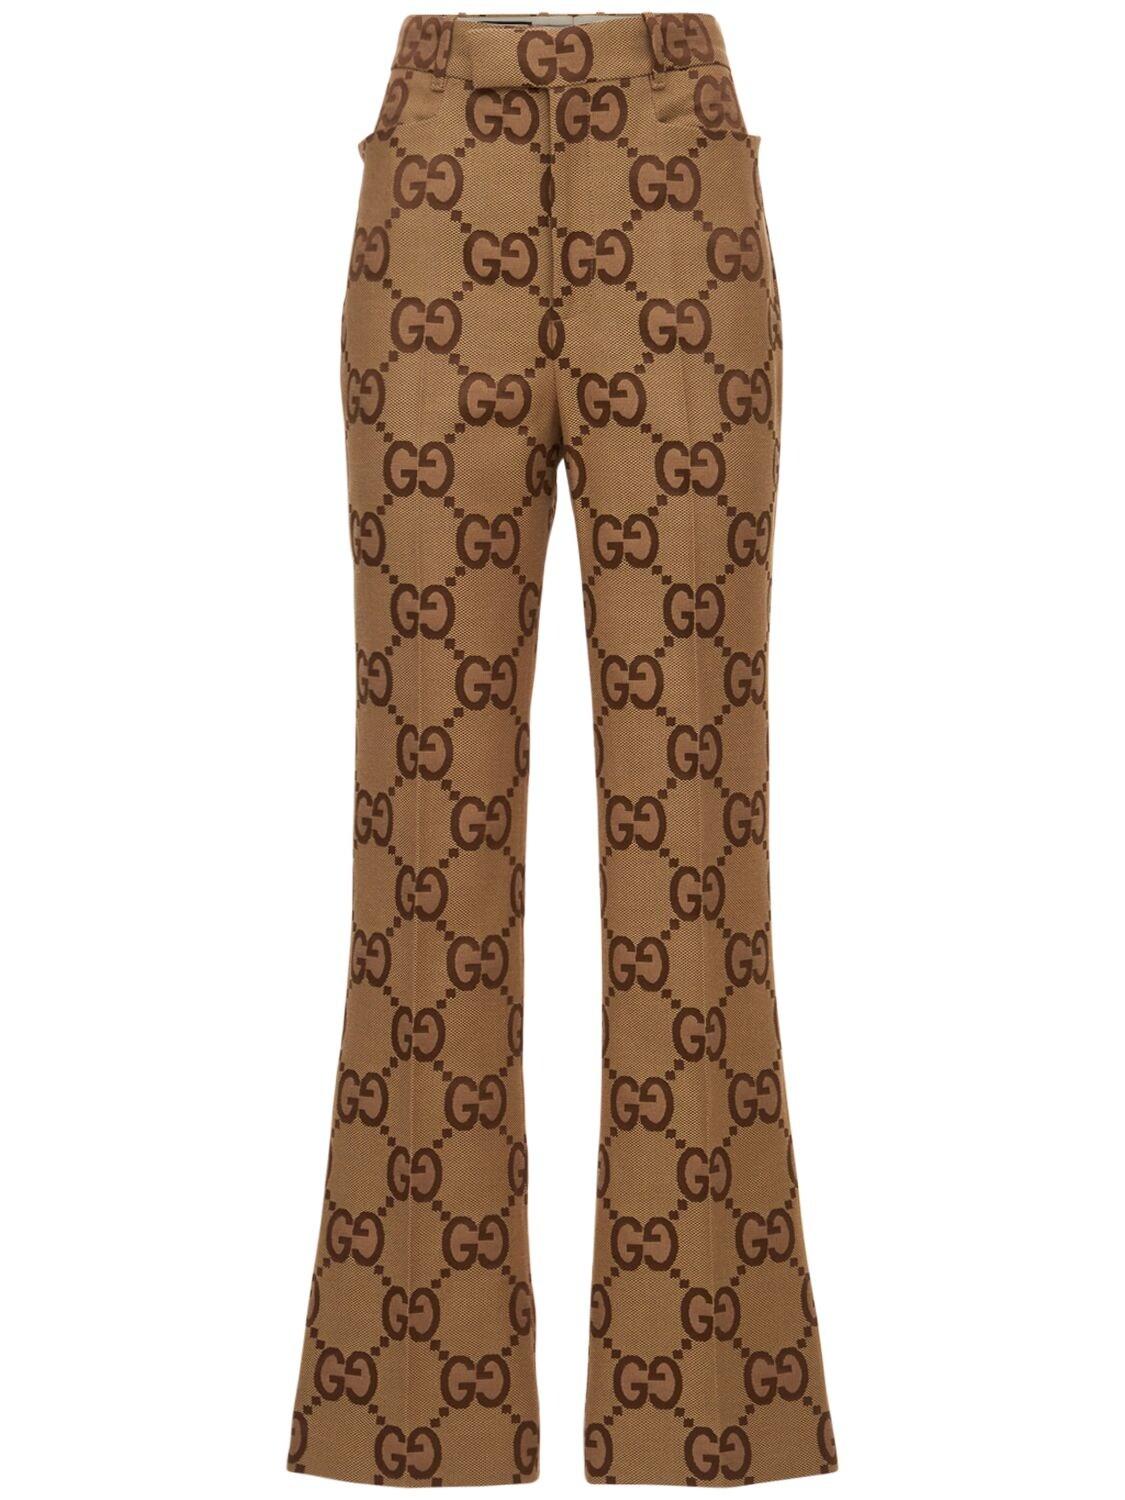 GG jacquard jogging pant in camel and brown